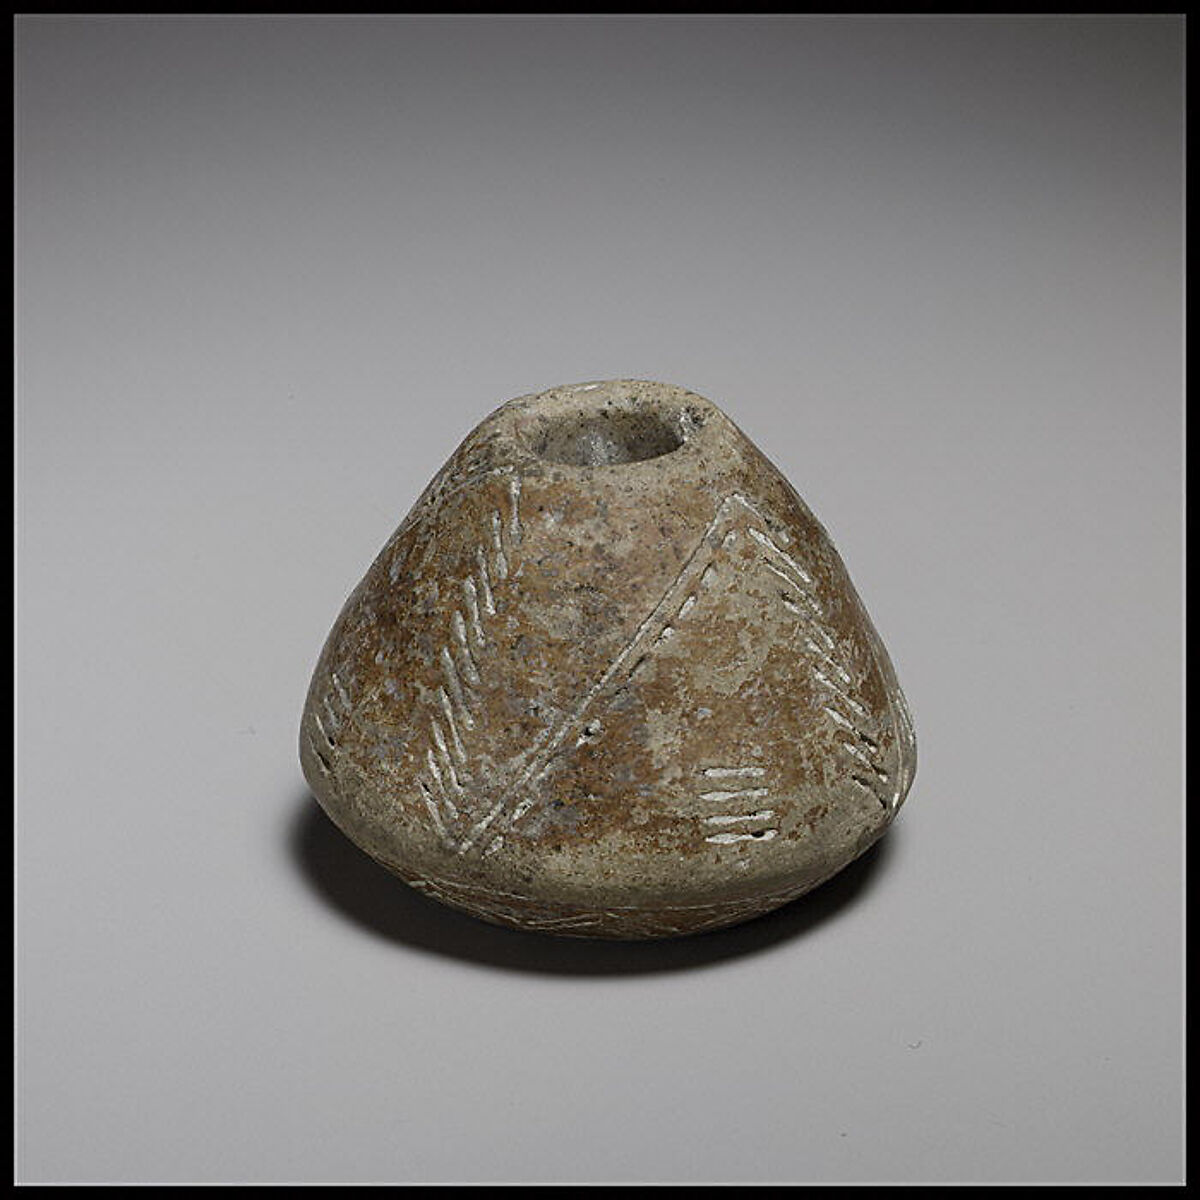 Terracotta truncated-biconical spindle-whorl with angular base, Terracotta, Cypriot 